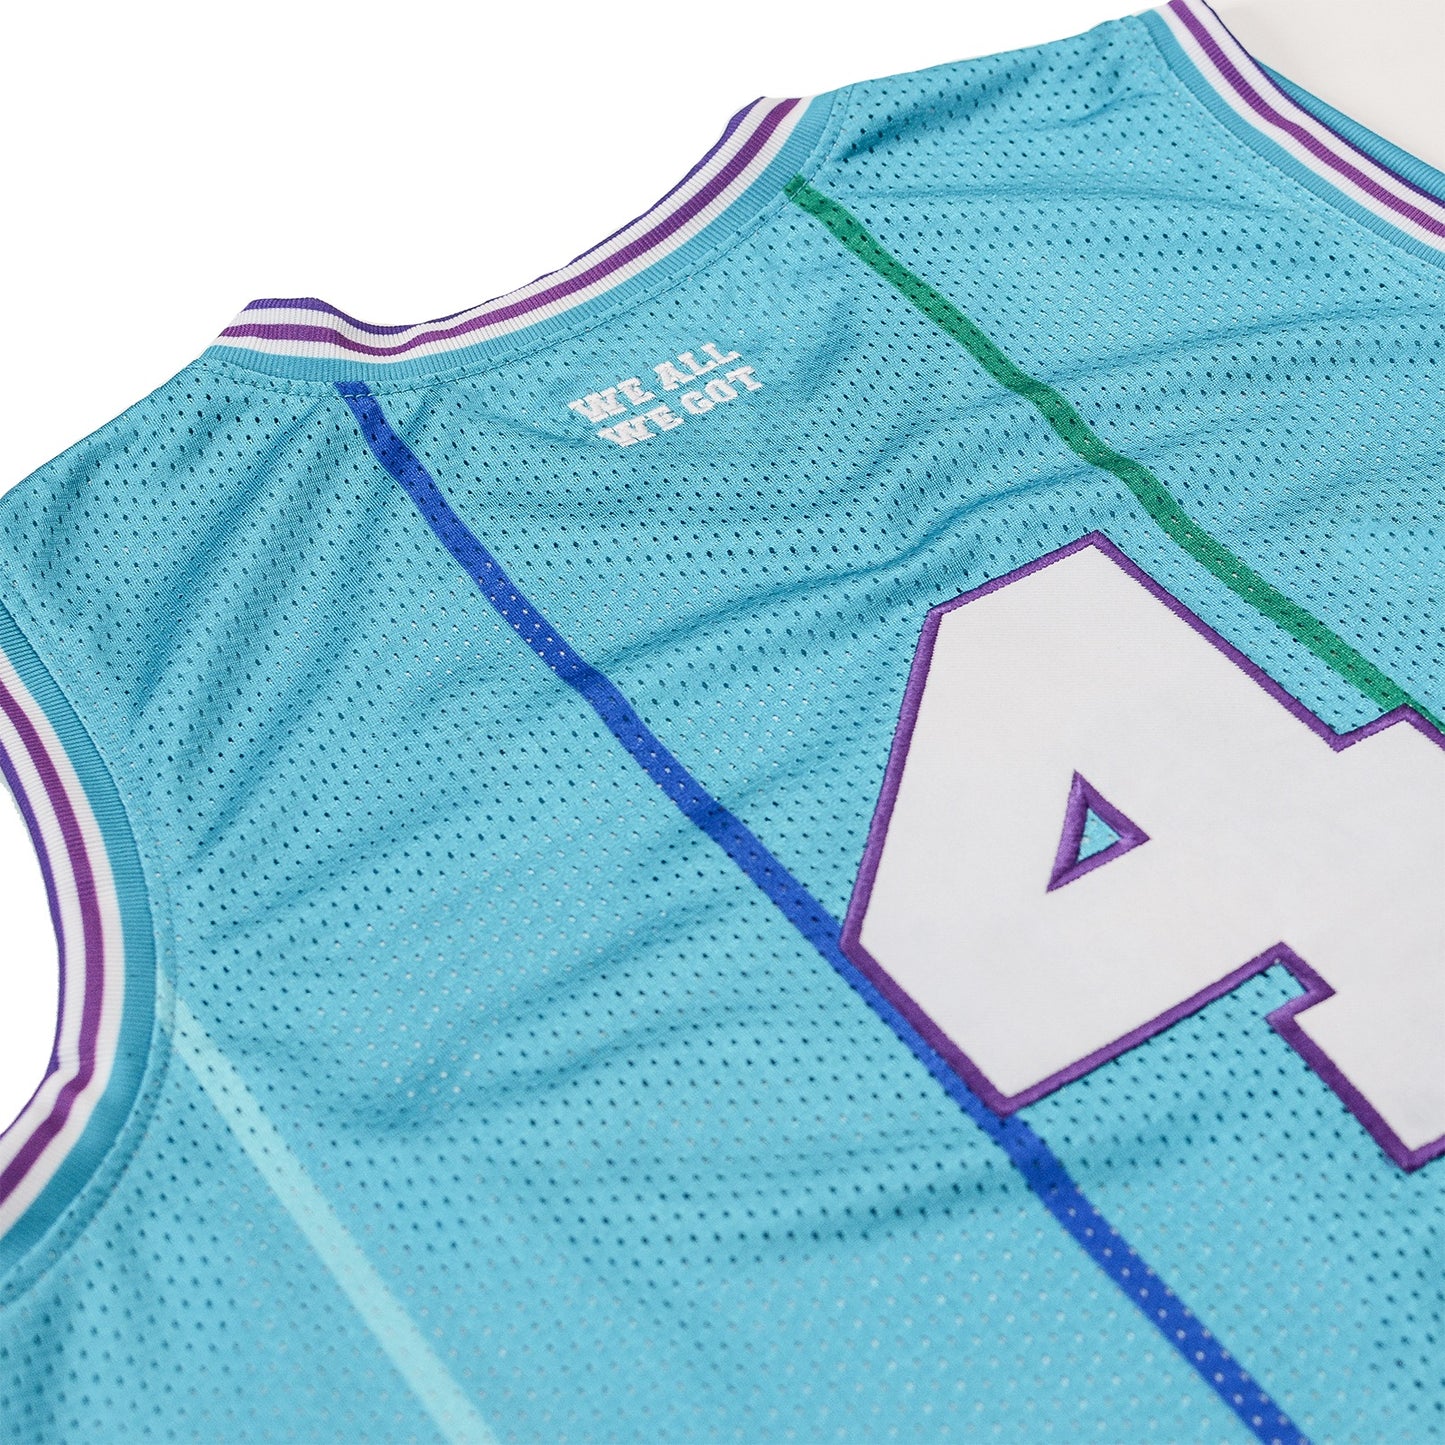 The Loyalty Basketball Jersey in Teal